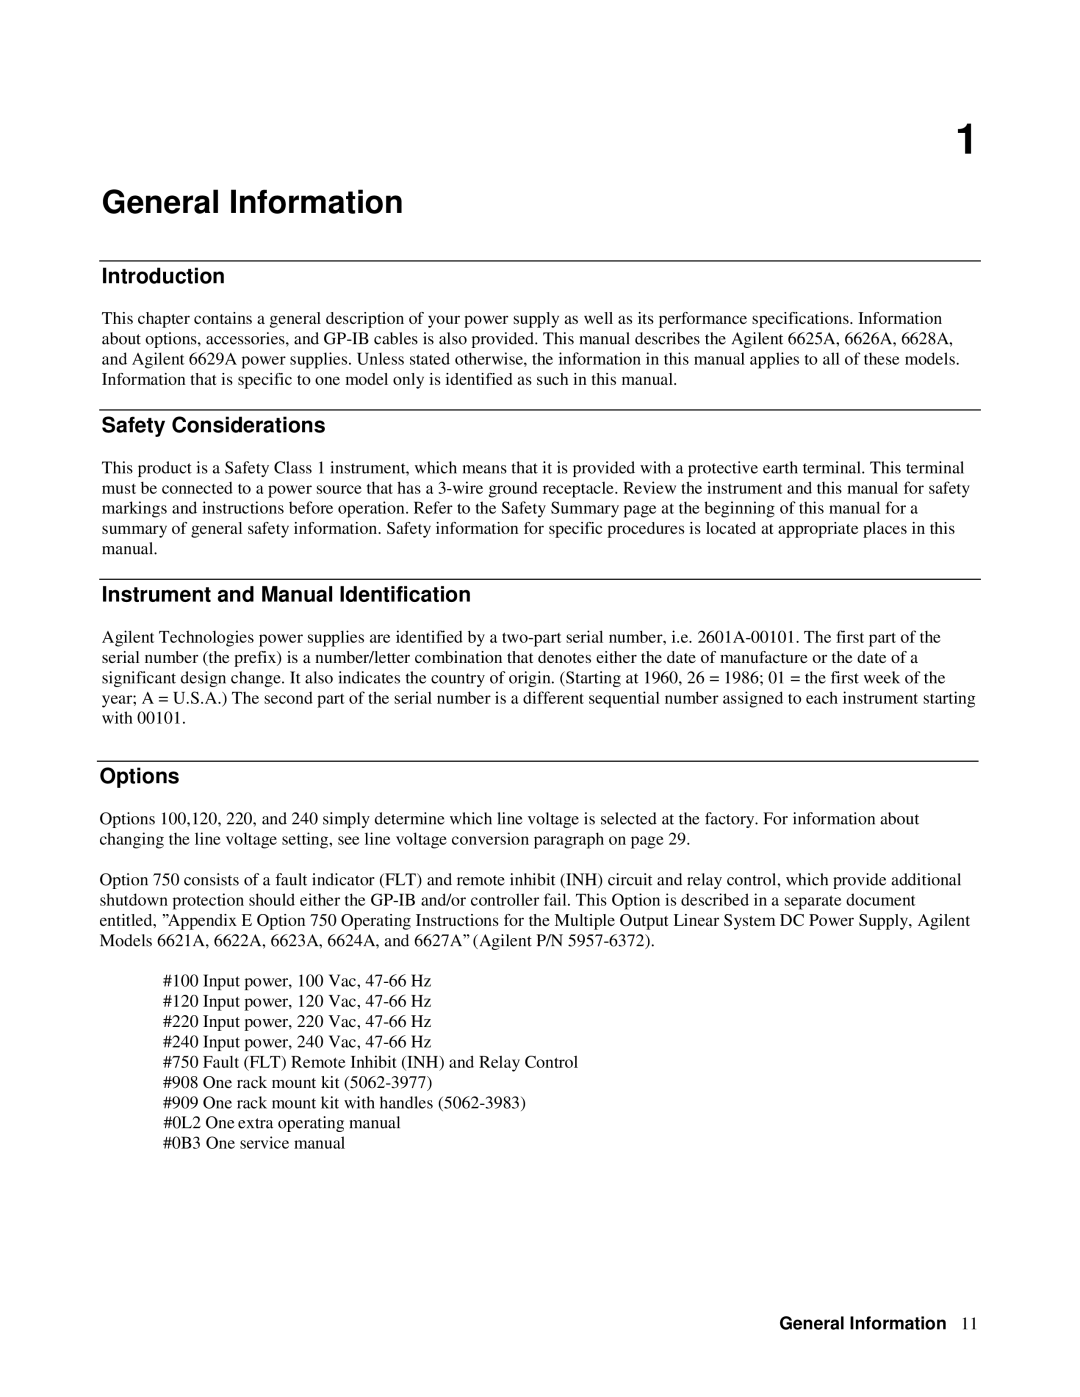 Agilent Technologies 6629A General Information, Introduction, Safety Considerations, Instrument and Manual Identification 